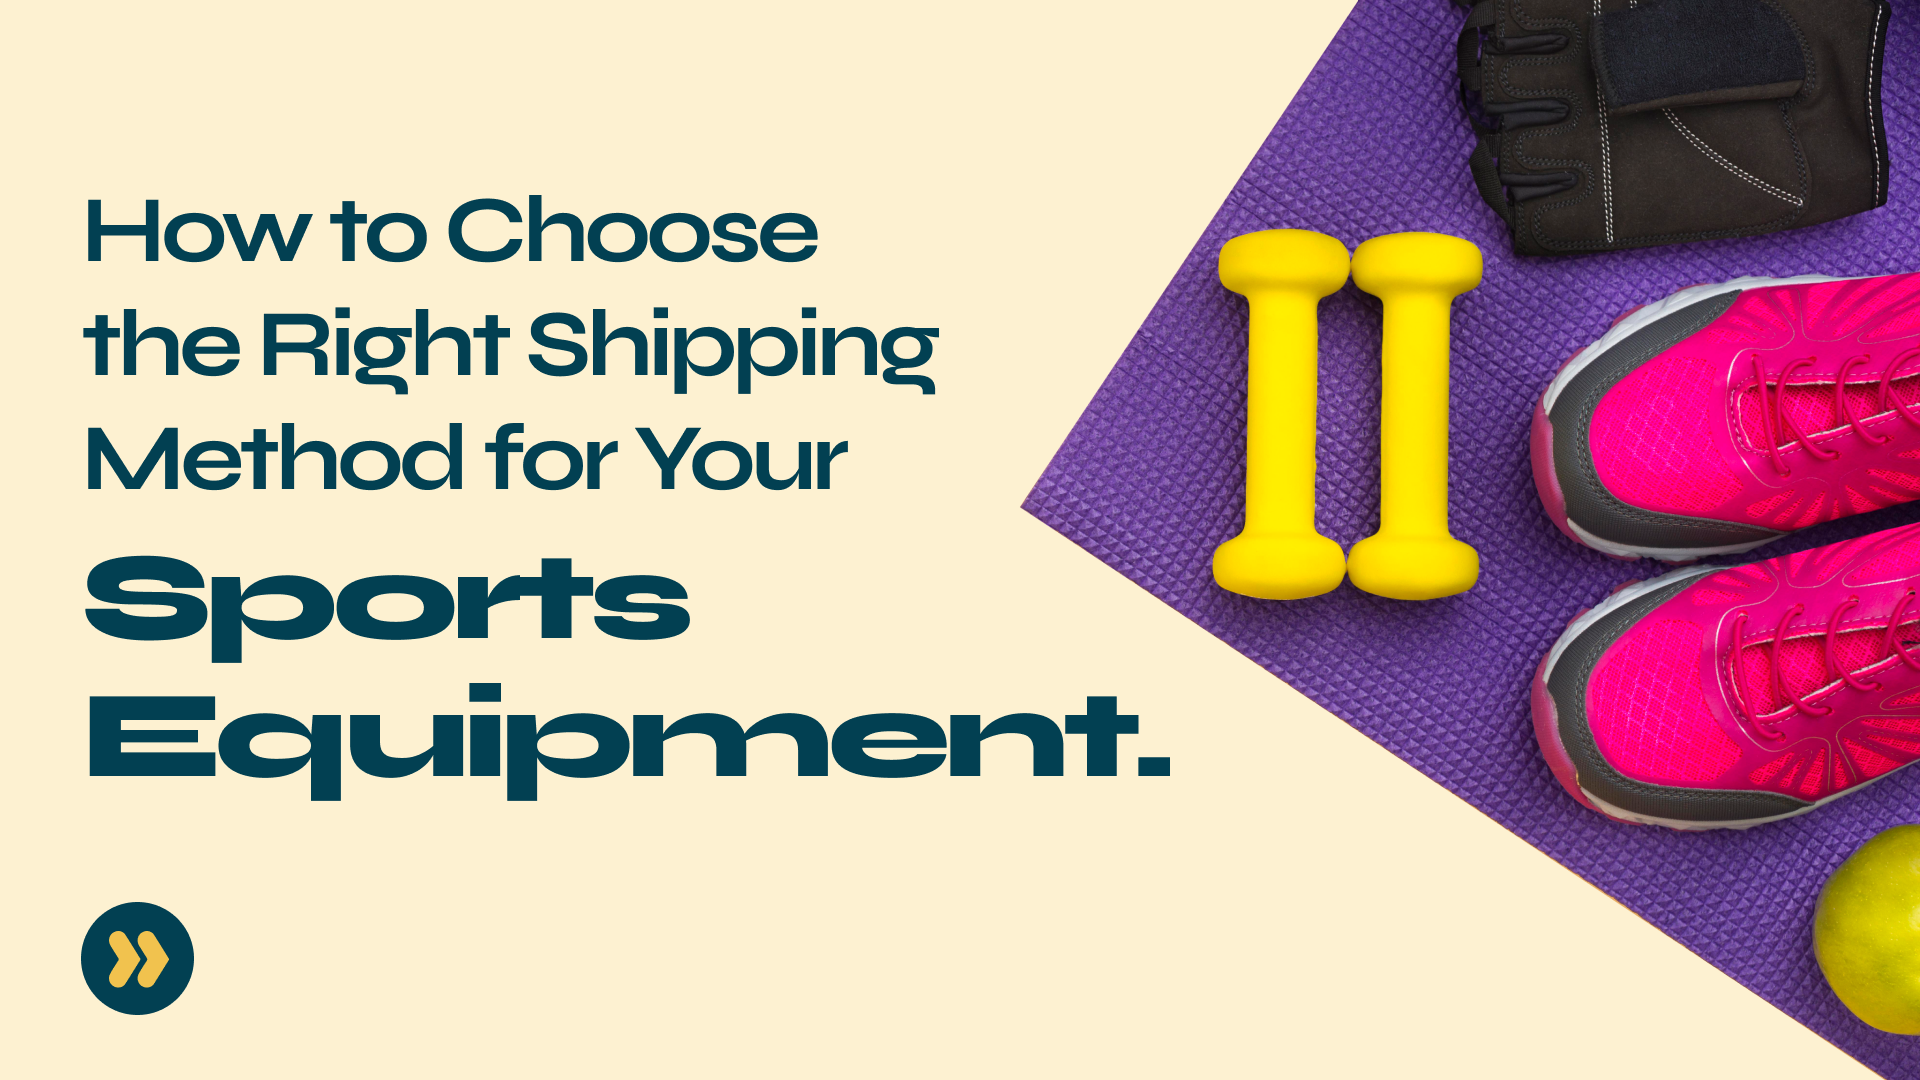 How to Choose the Right Shipping Method for Your Sports Equipment